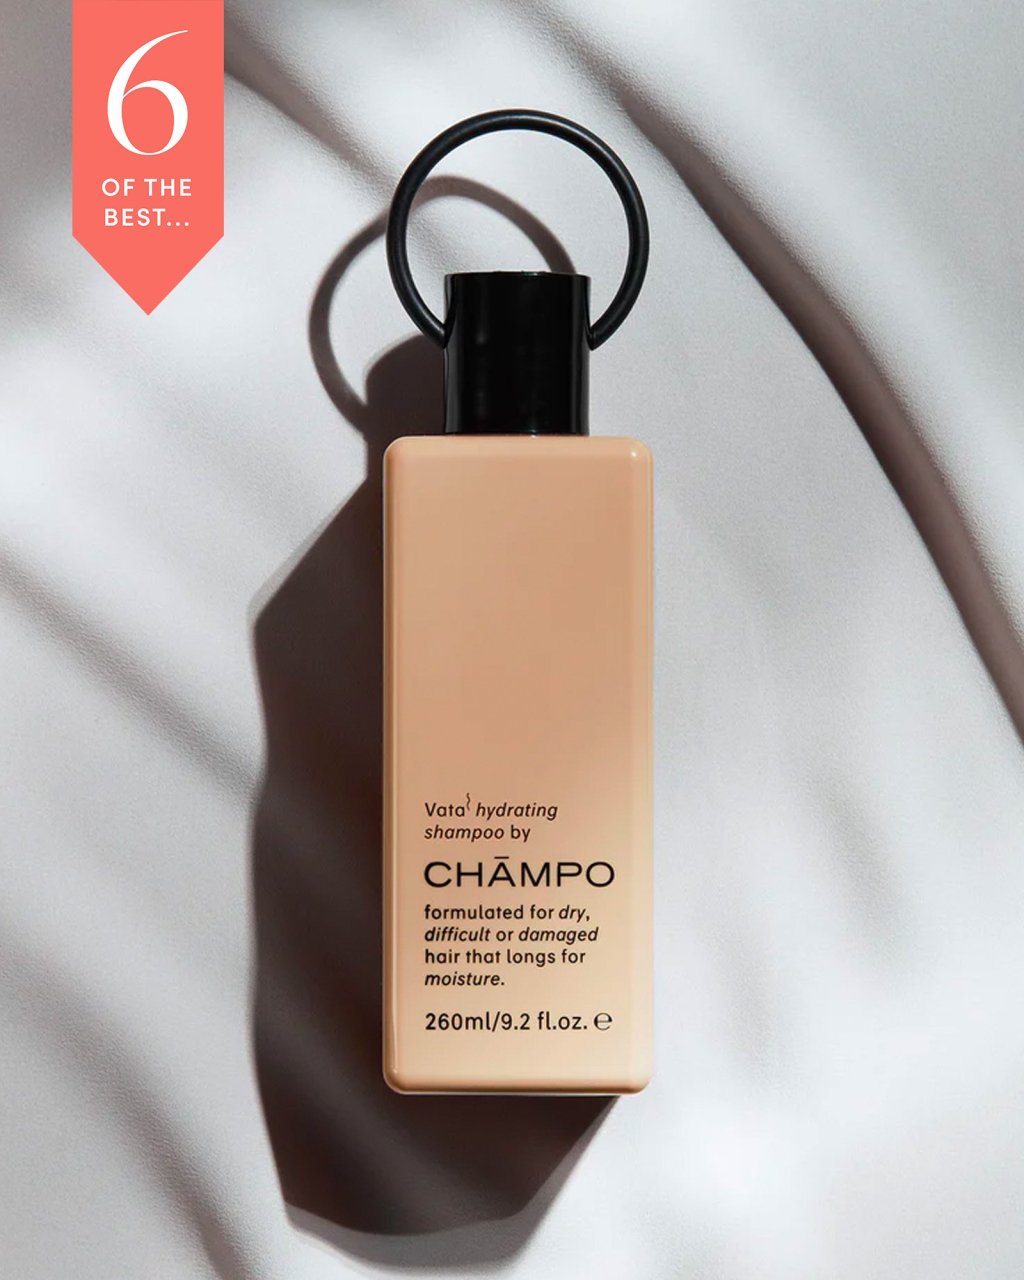 6 Of The Best Shampoo For Damaged And Over-Styled Hair